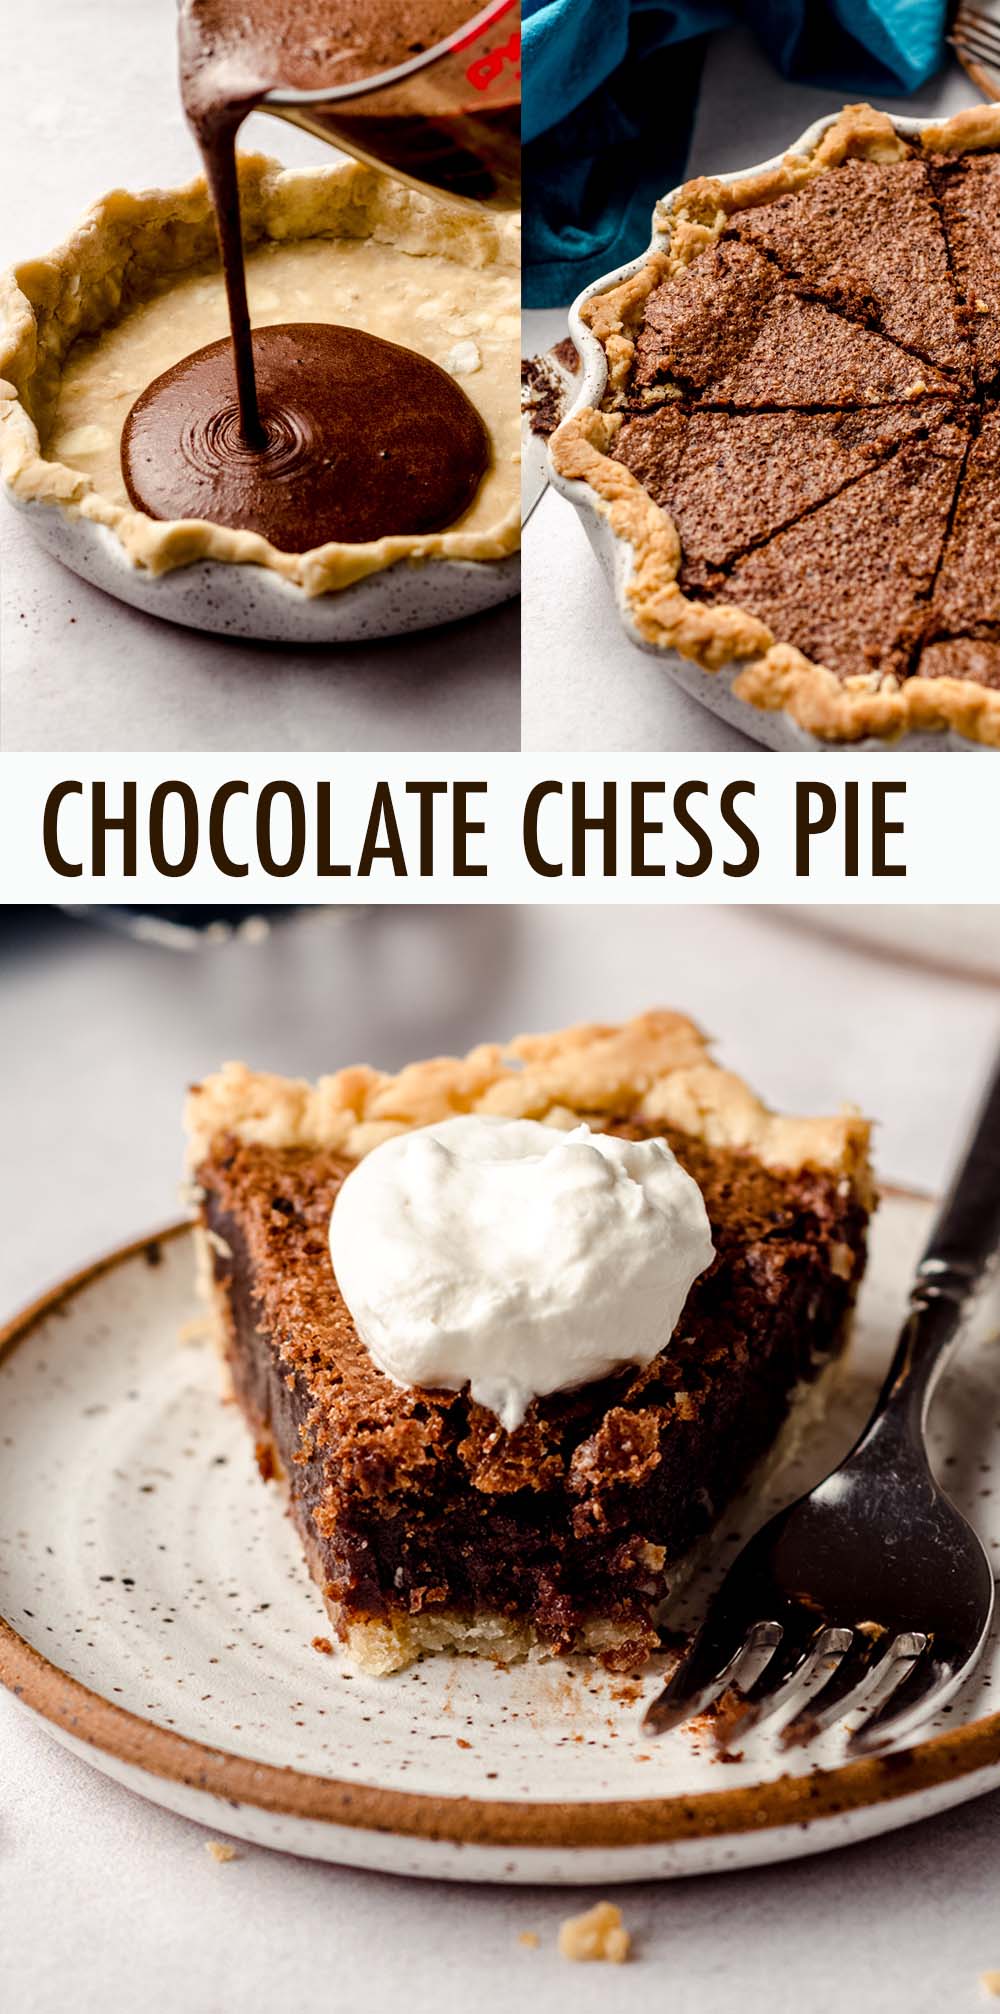 Chocolate chess pie is a traditionally Southern dessert with a slightly crisp and crackly top layer that leads to a rich and luscious brownie-like center. Serve this perfectly chocolatey pie just a touch warm with whipped cream, ice cream, or as is. via @frshaprilflours